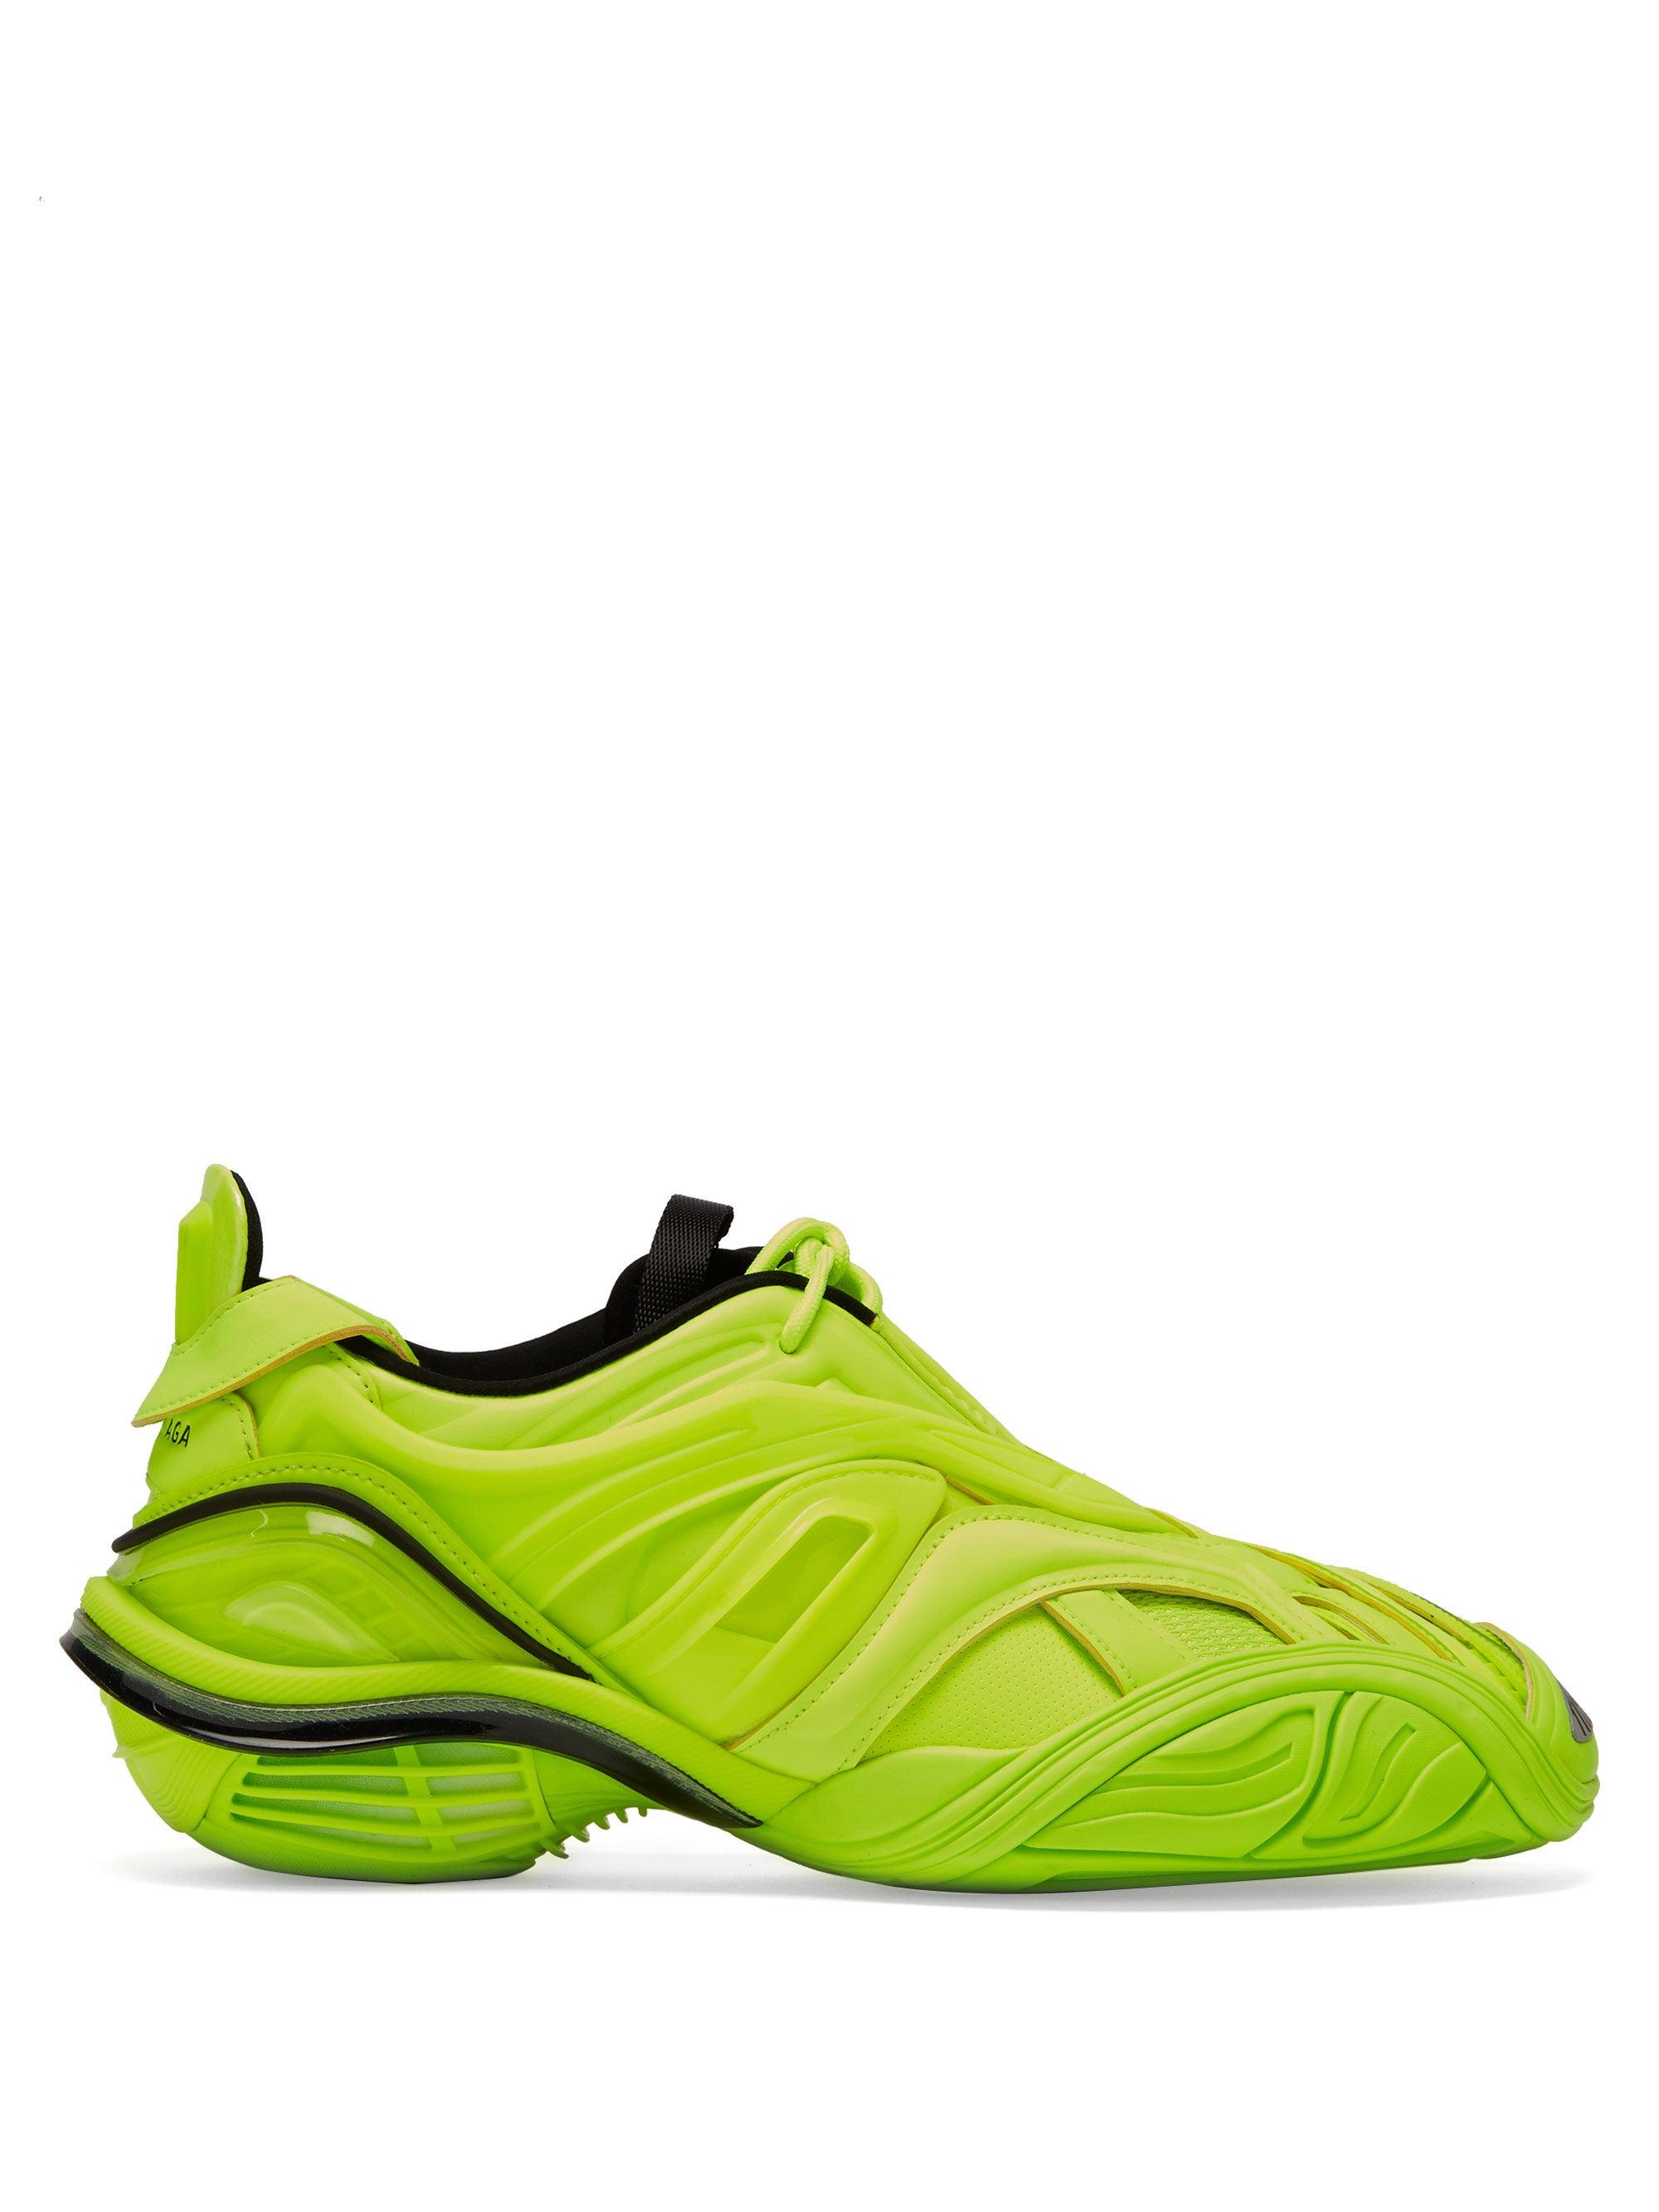 Balenciaga Rubber Tyrex Sneakers in Yellow - Save 68% | Lyst